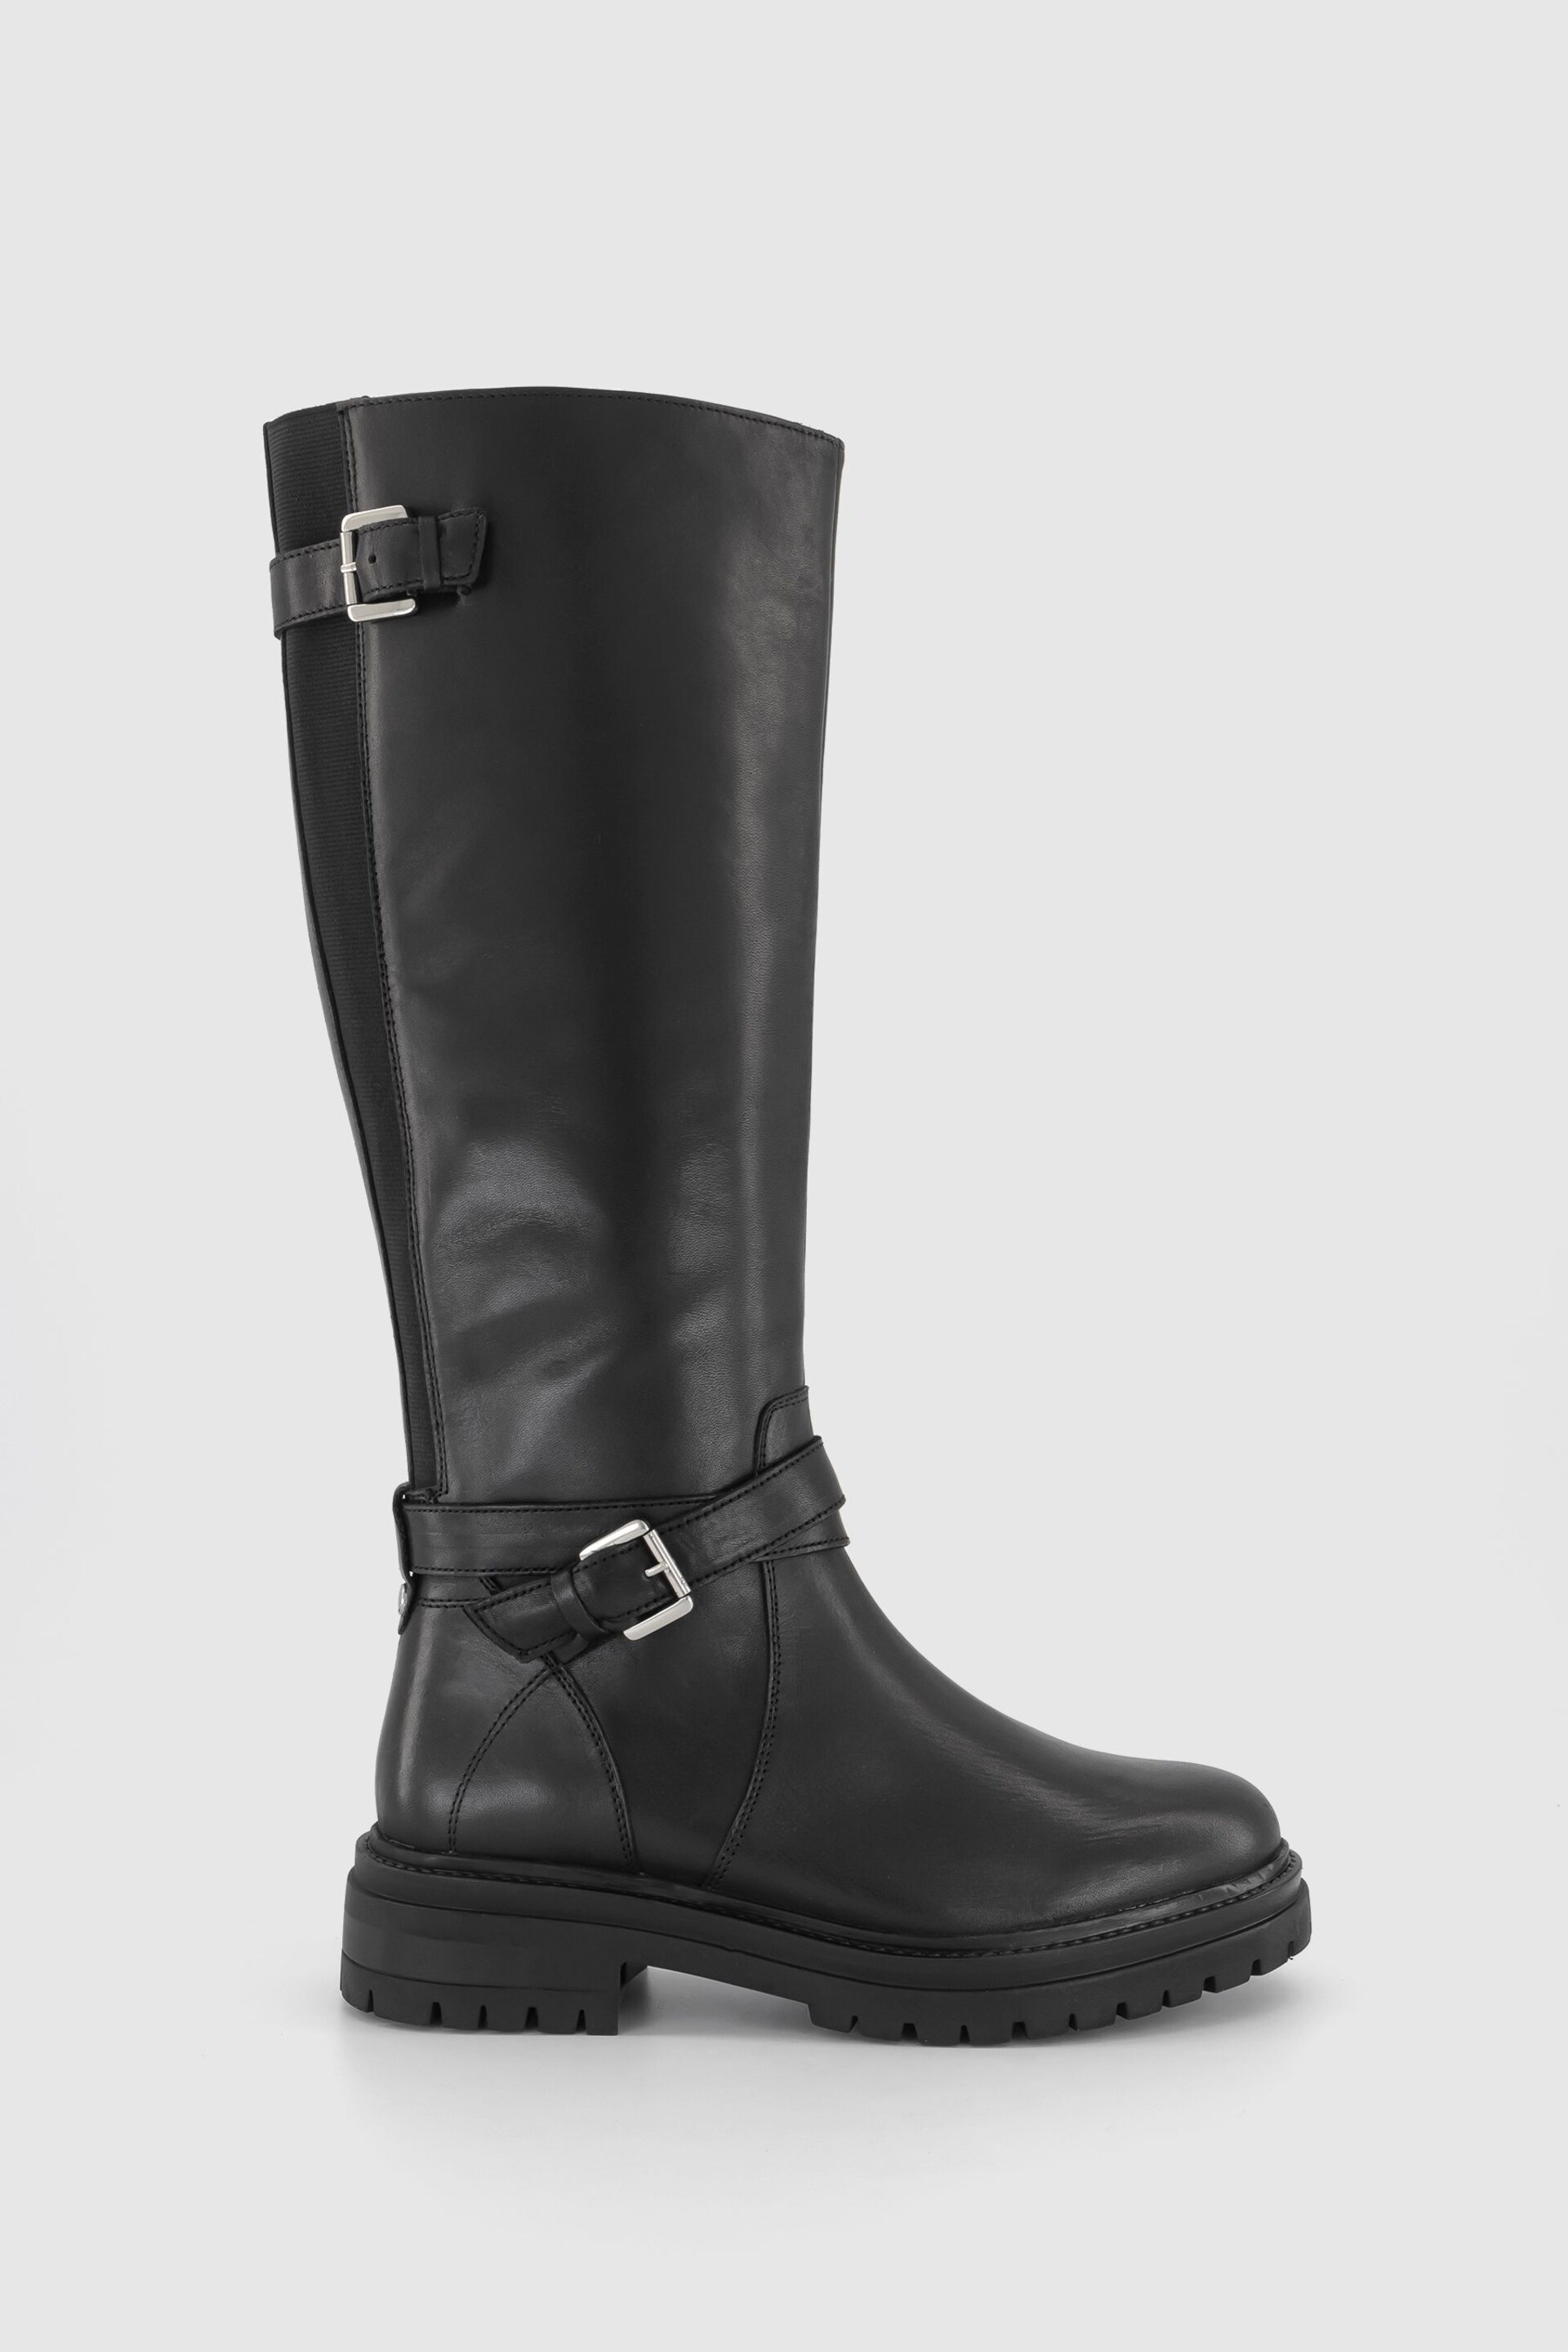 Office Black Leather Buckle Strap Krissy Knee High Rider Boots - Image 1 of 5